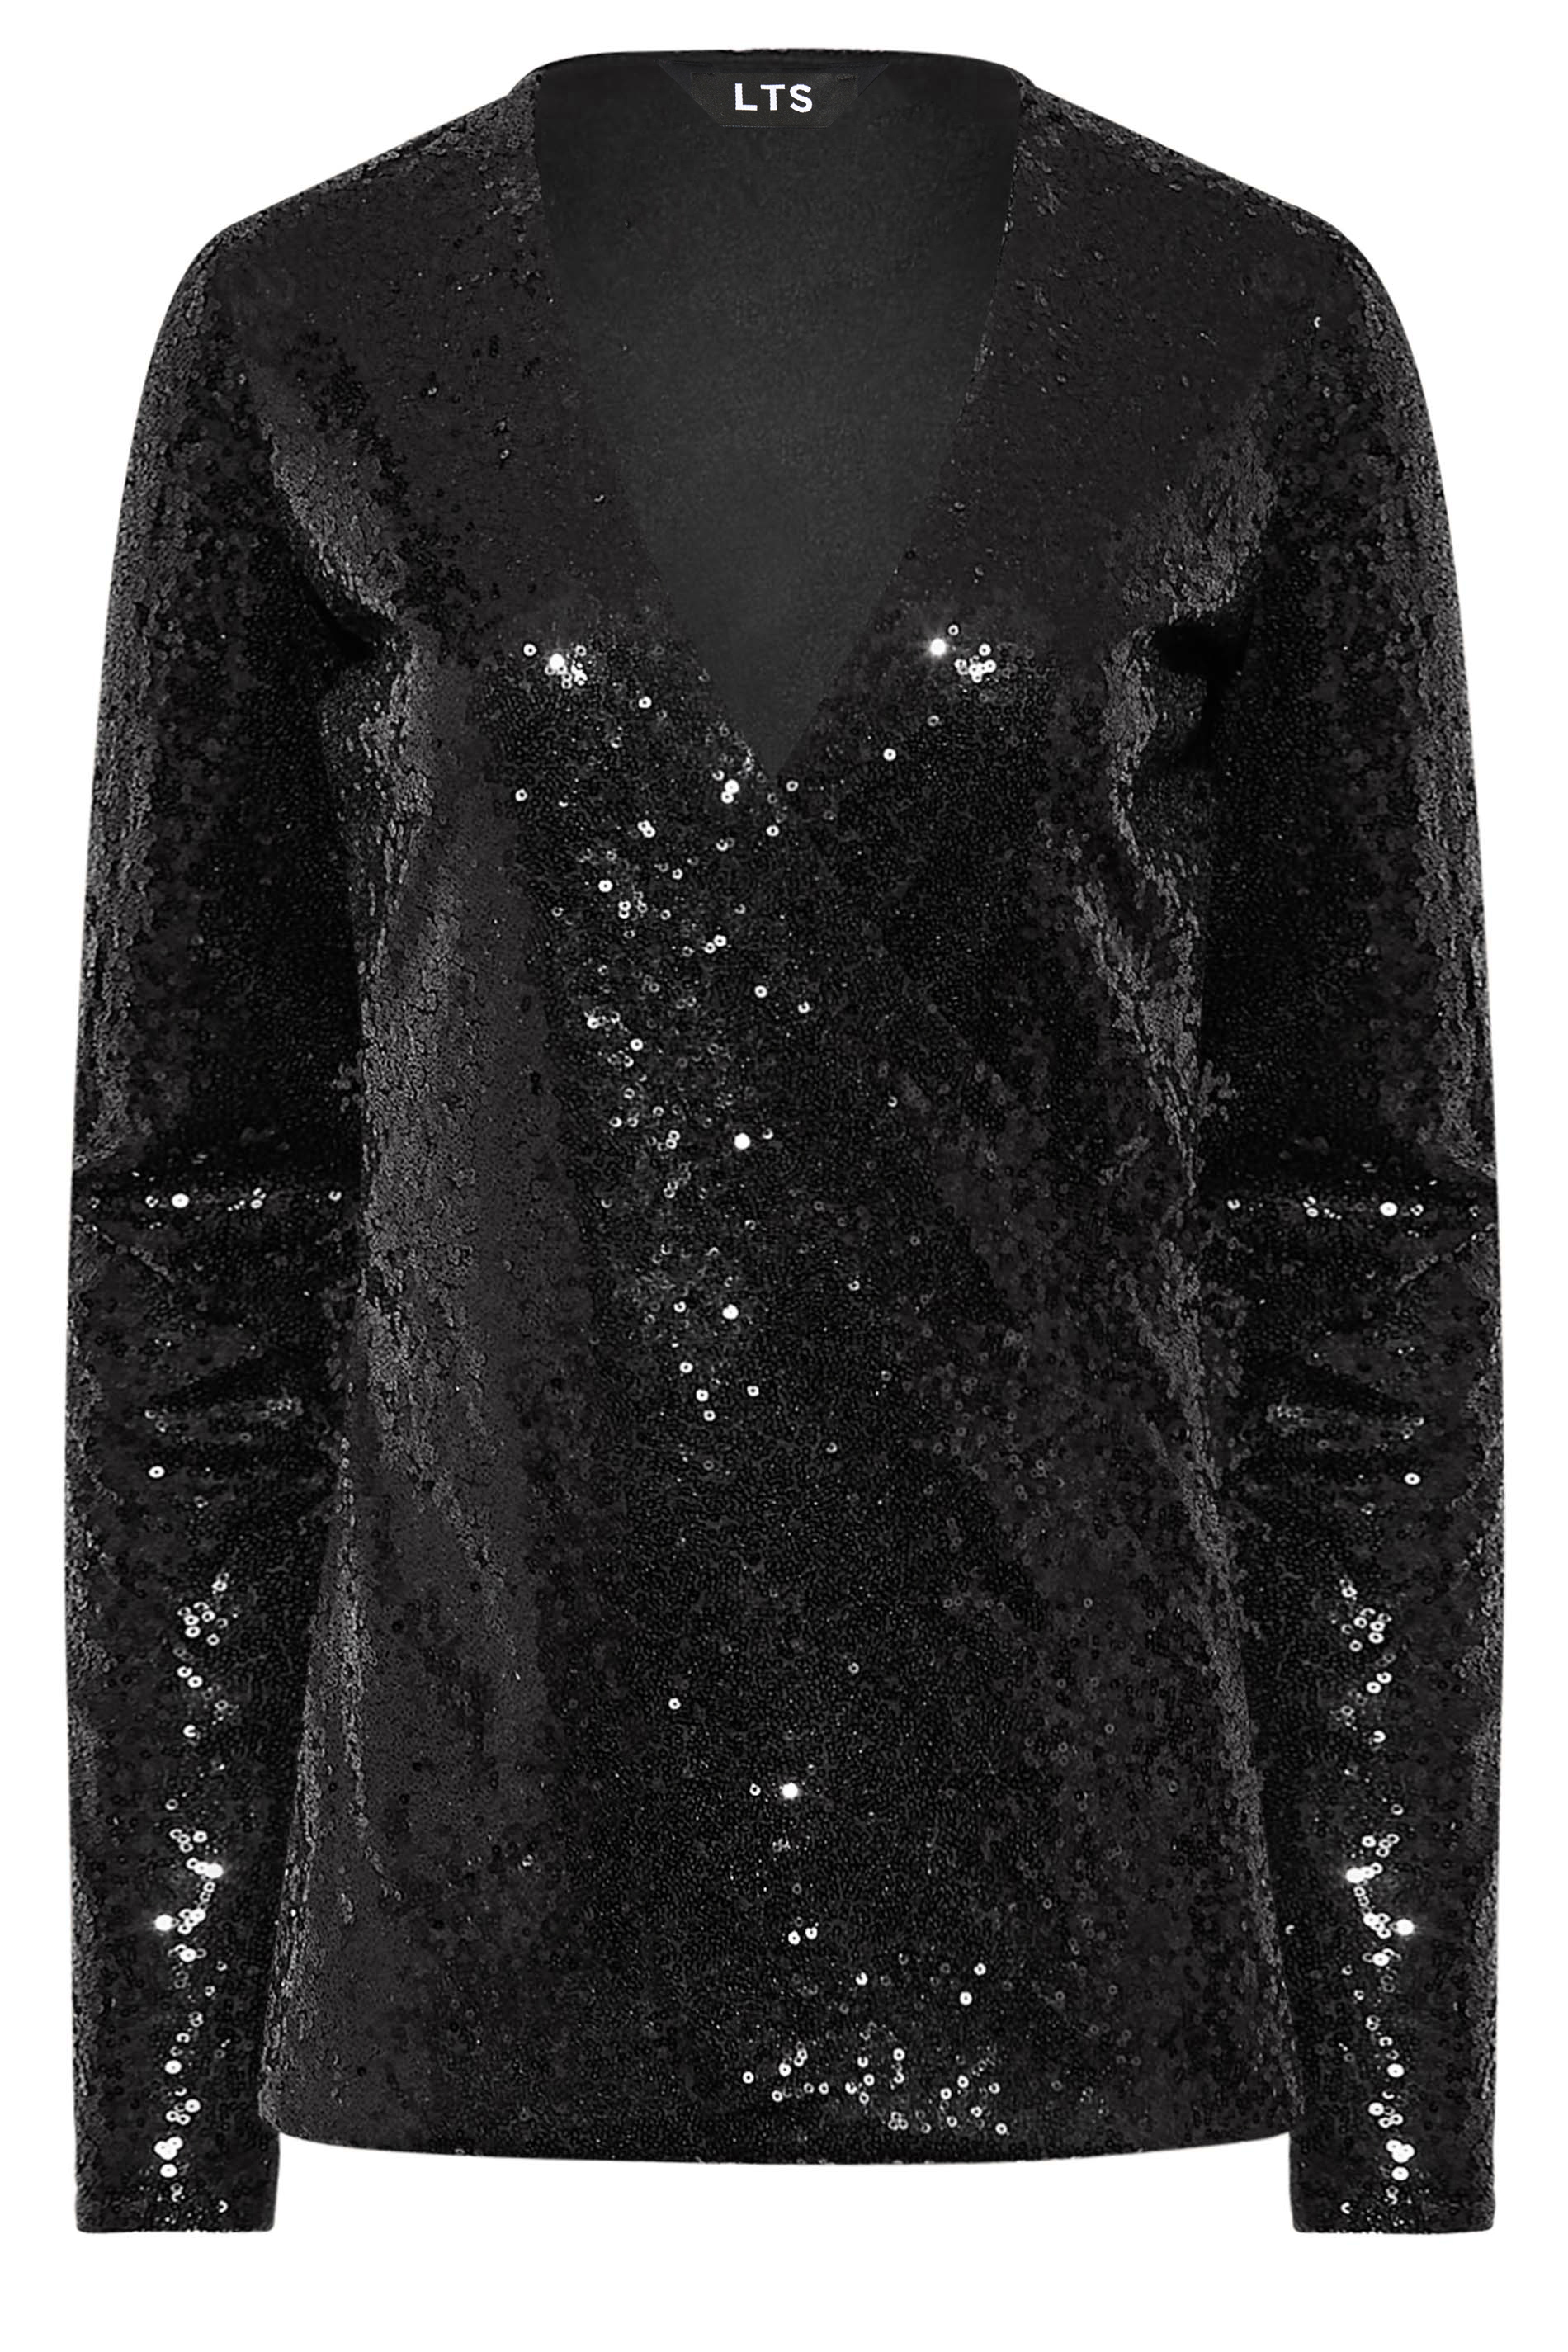 LTS Tall Women's Black Sequin Embellished Wrap Top | Long Tall Sally 2